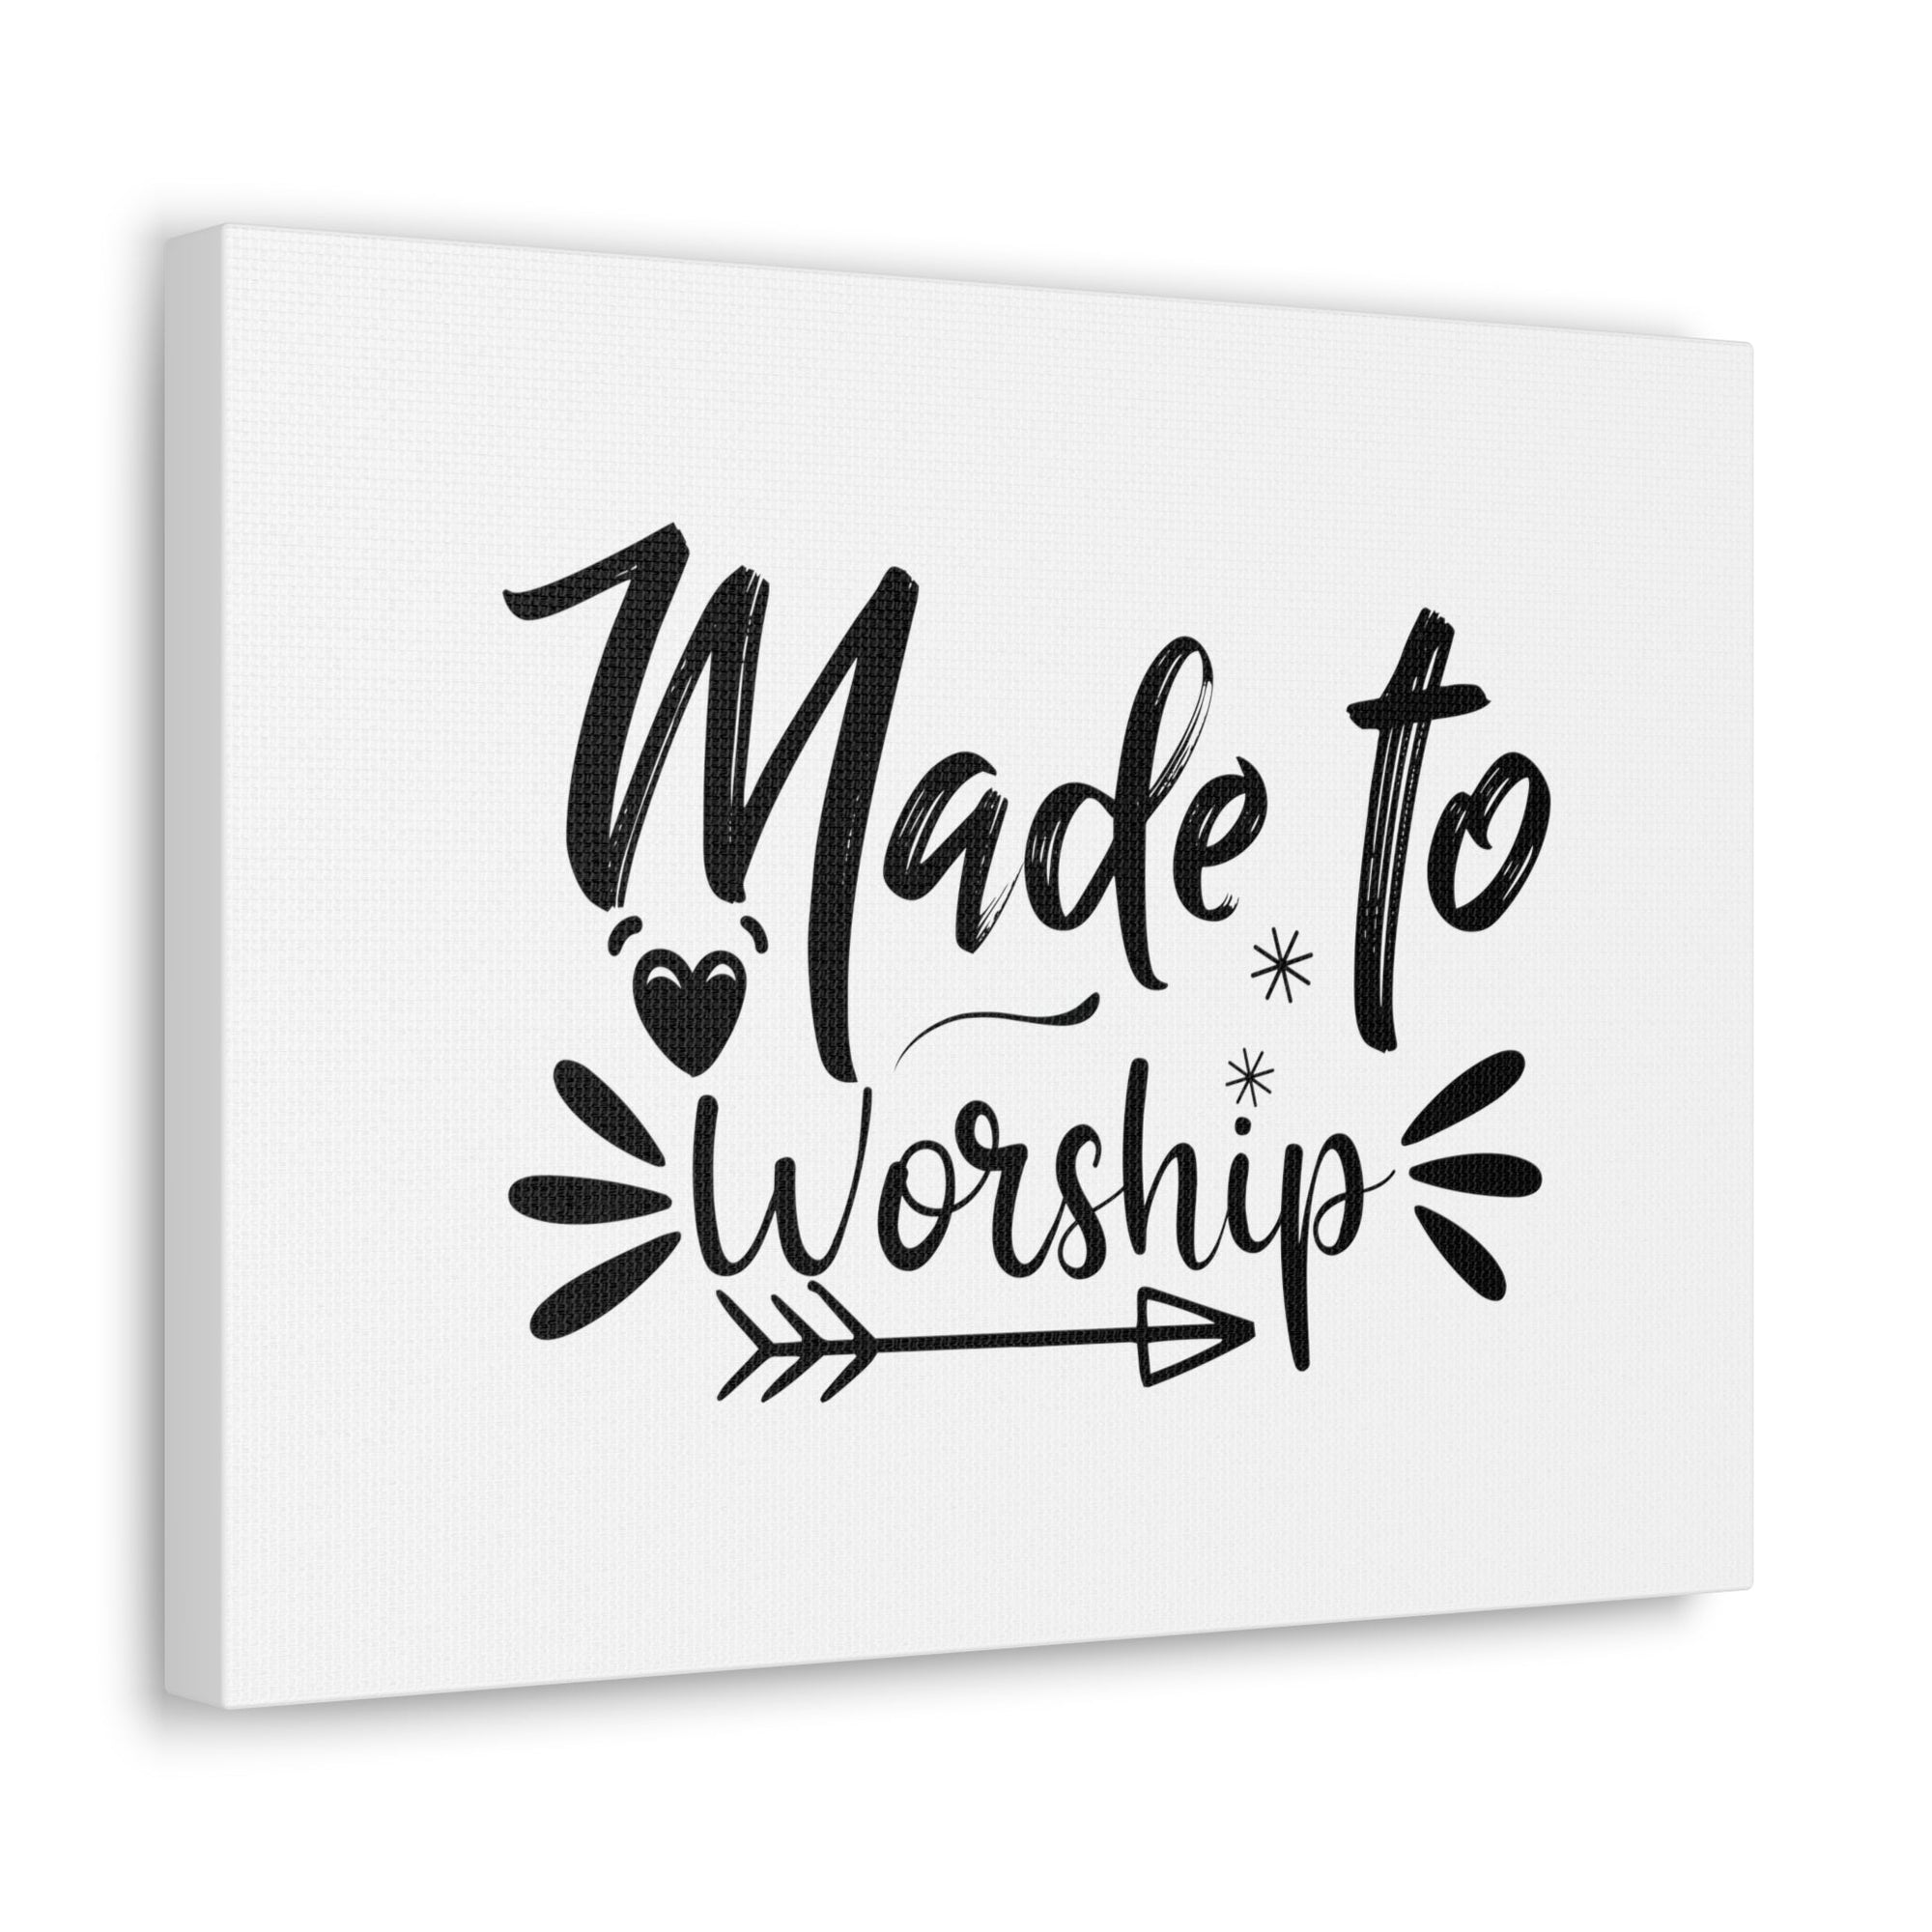 Scripture Walls To Worship Arrow Psalm 95:6 Christian Wall Art Bible Verse Print Ready to Hang Unframed-Express Your Love Gifts